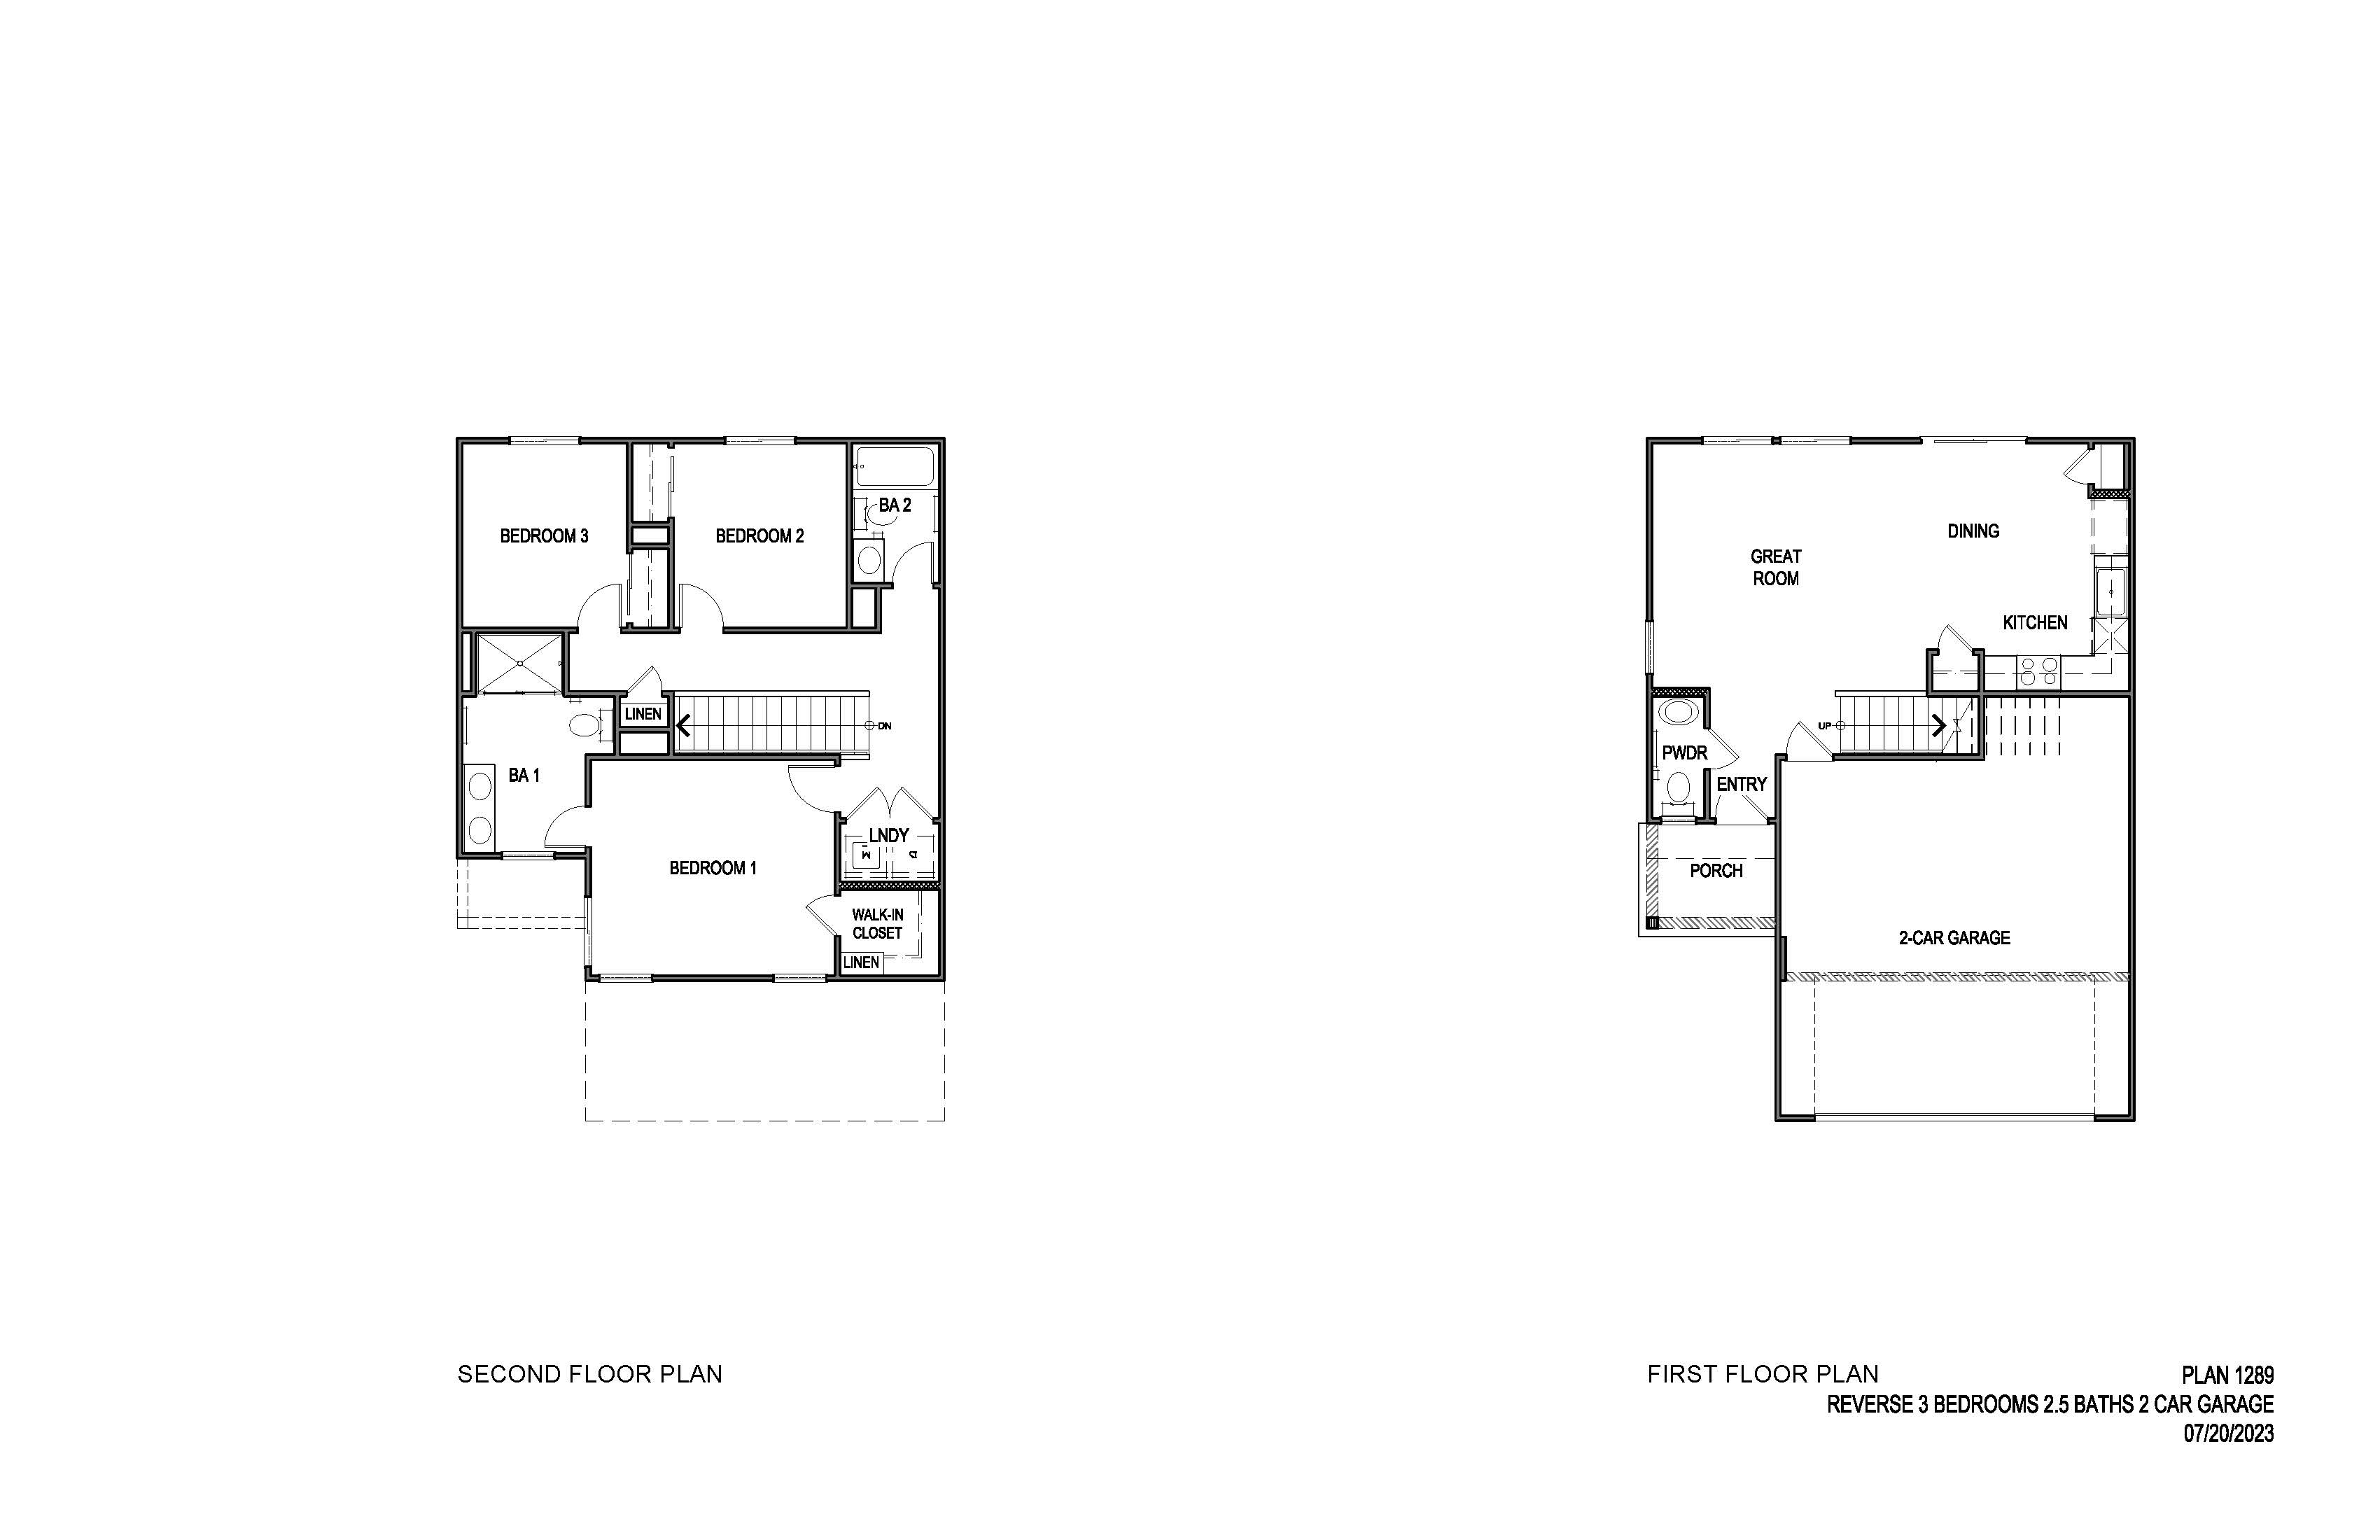 Two-story floorplan truckee garage on the right